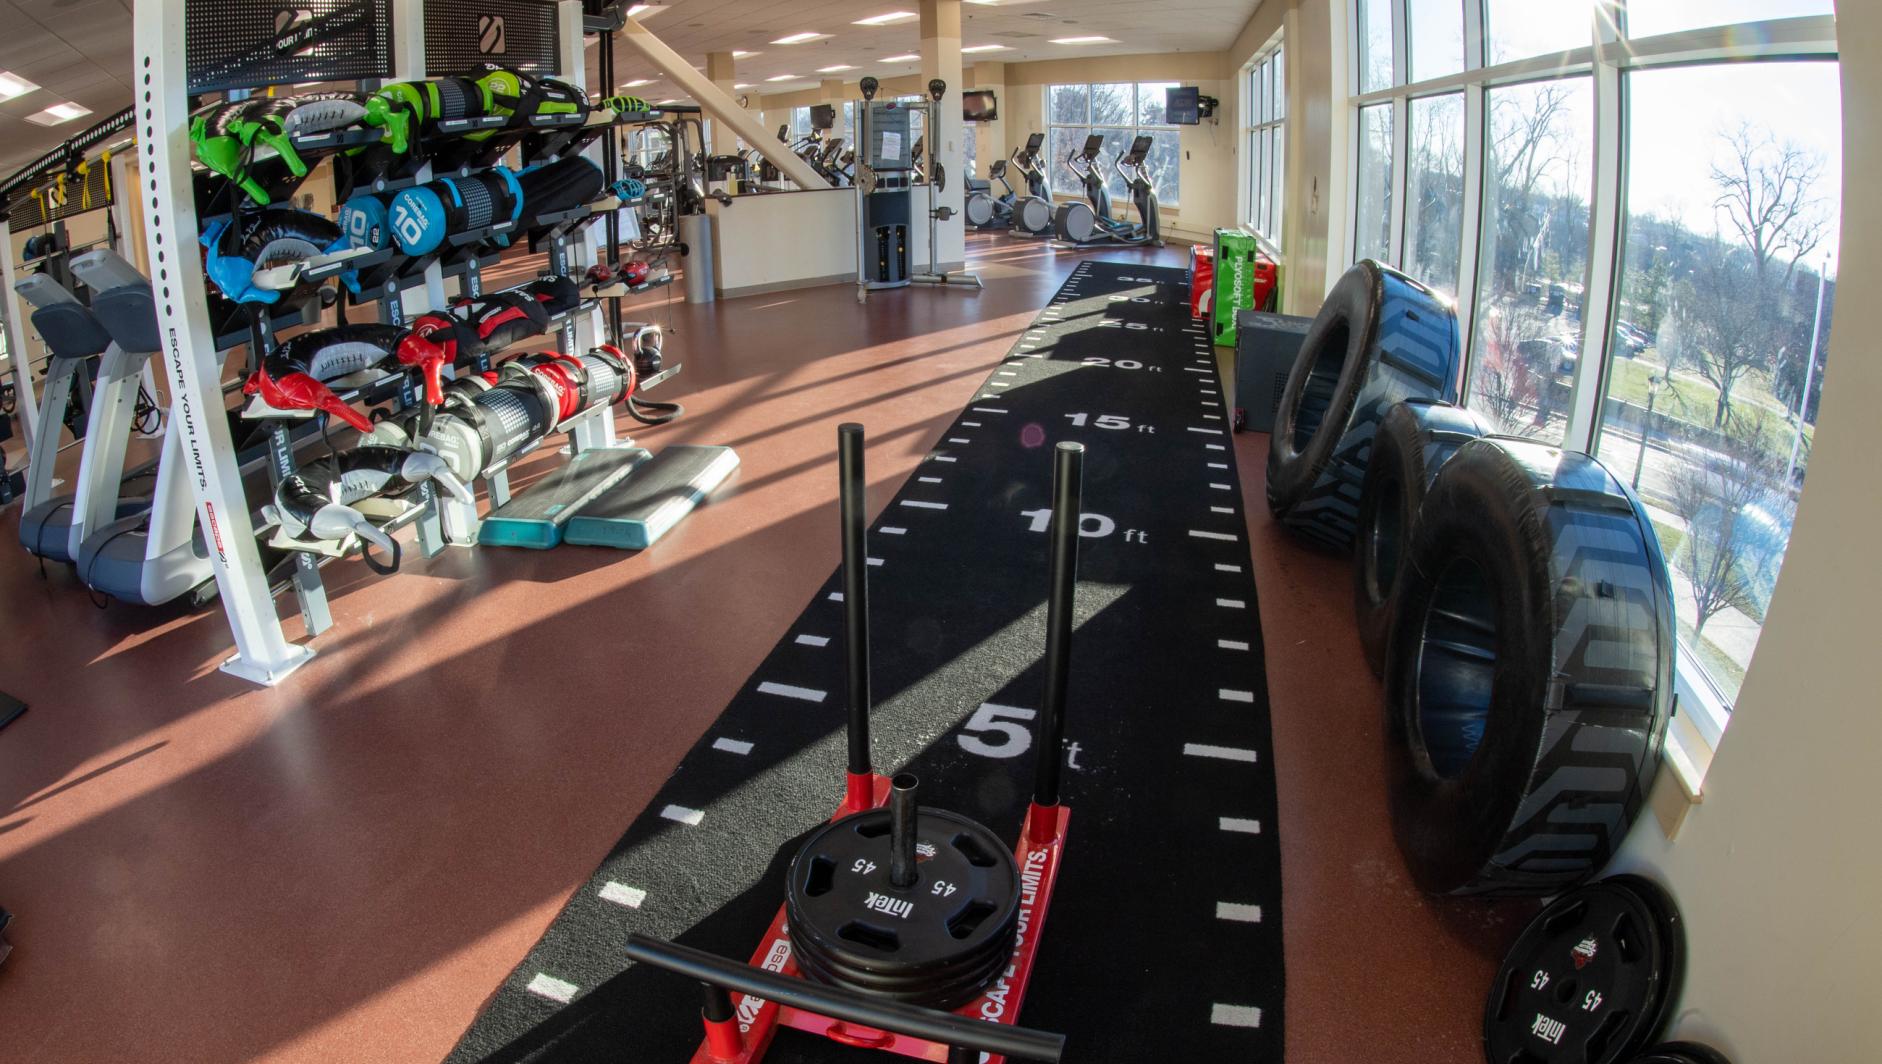 Exercise equipment inside the Springfield College Wellness Center on Tuesday, January 4, 2021.